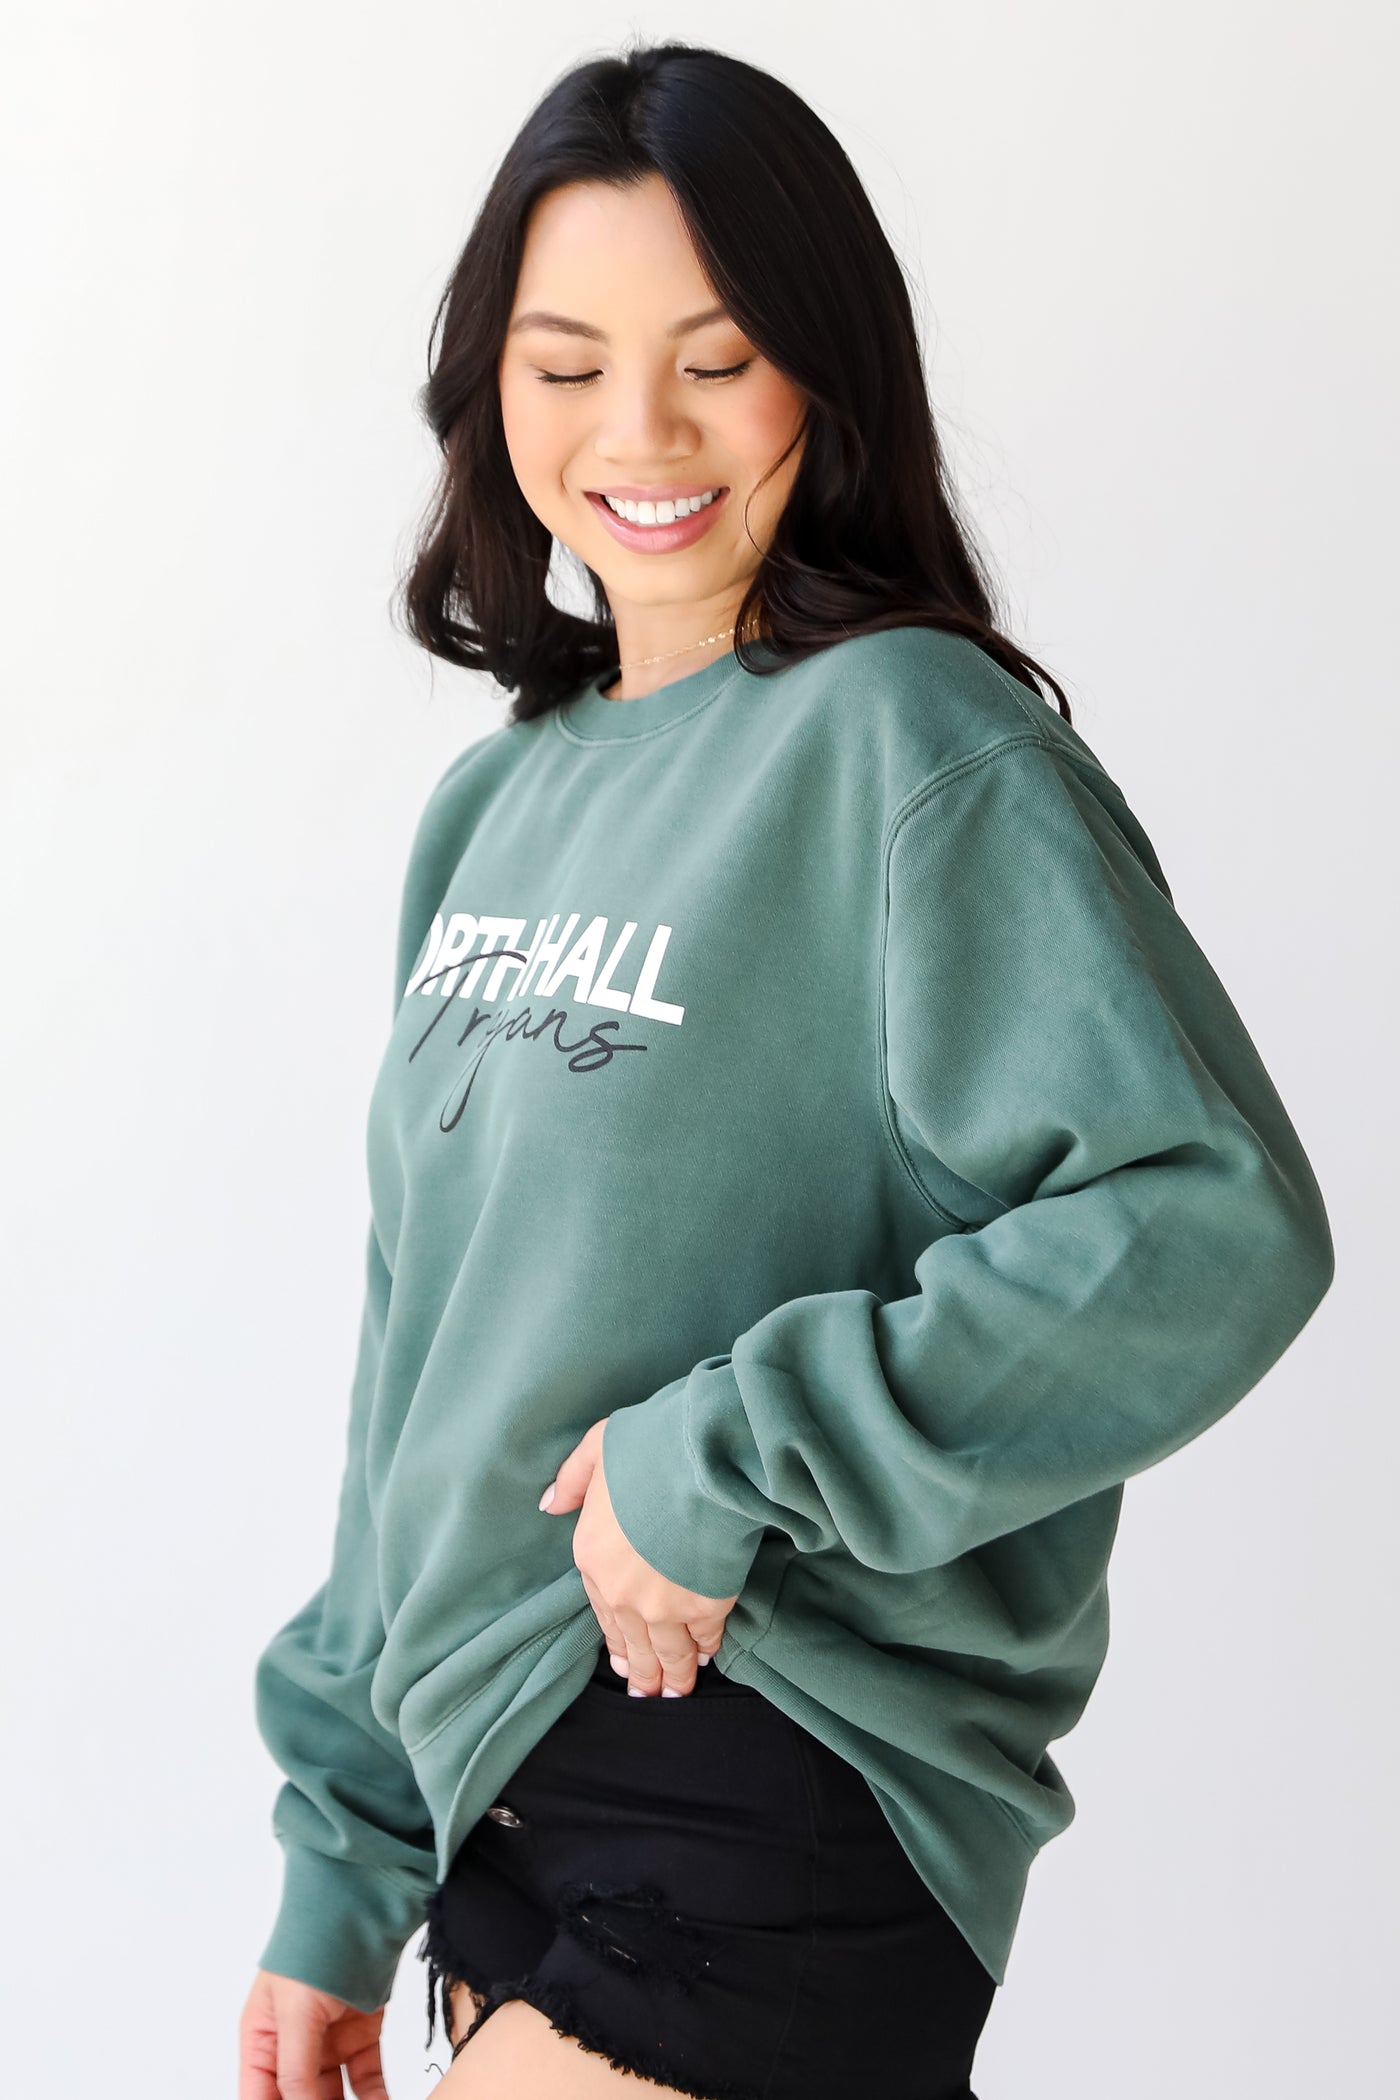 Green North Hall Trojans Pullover side view